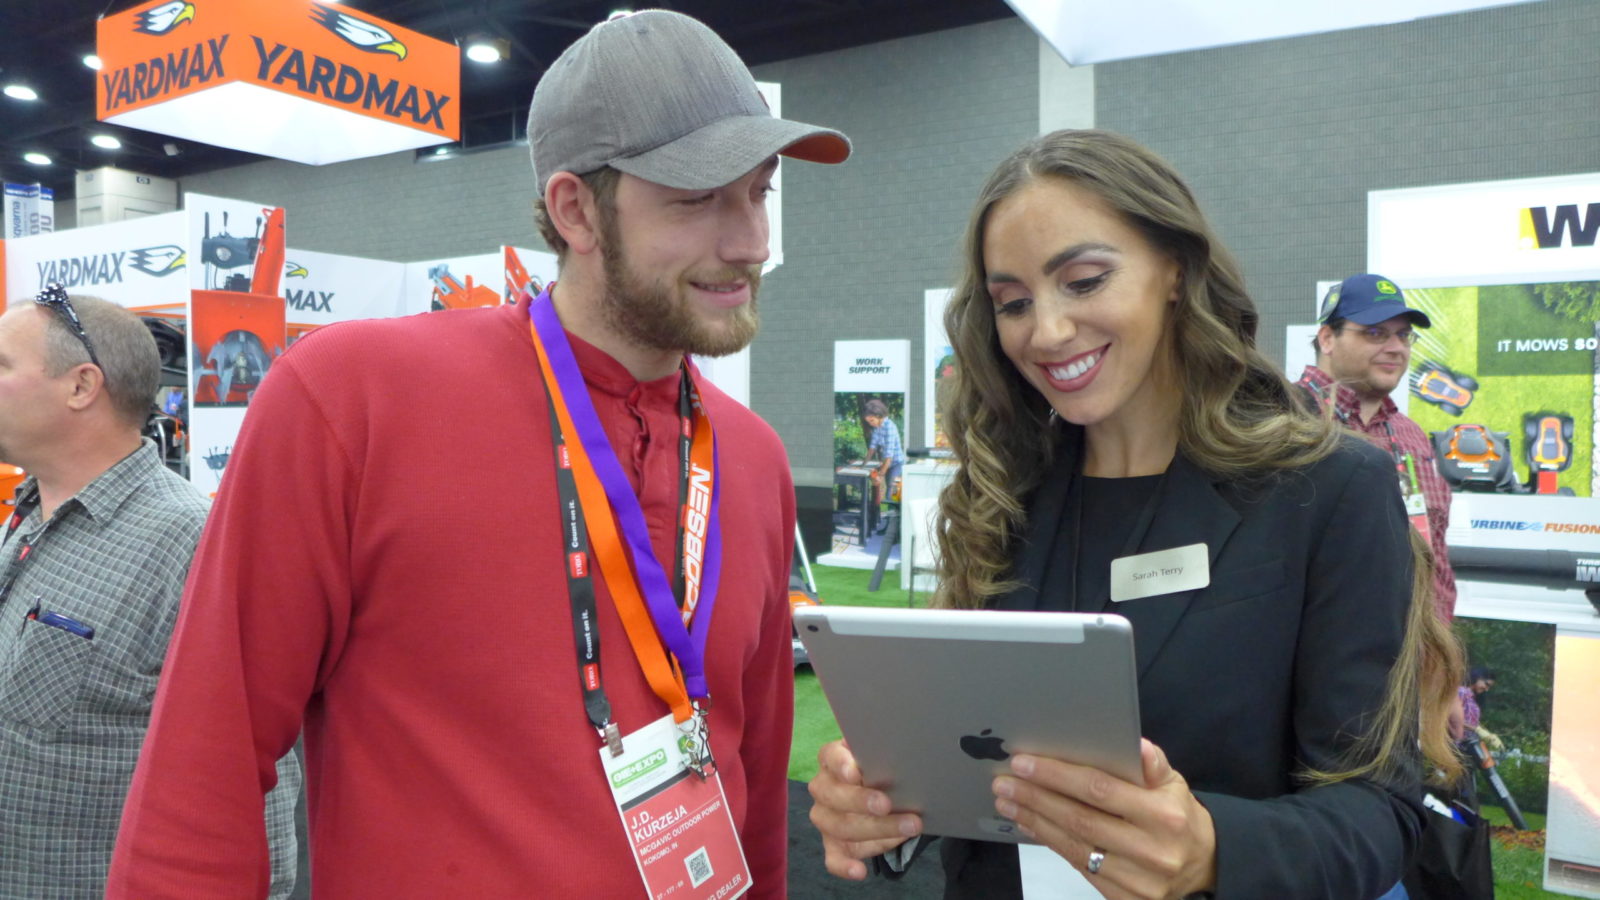 TPG Brand Ambassador greets a visitor and qualifies leads at GIE + Expo